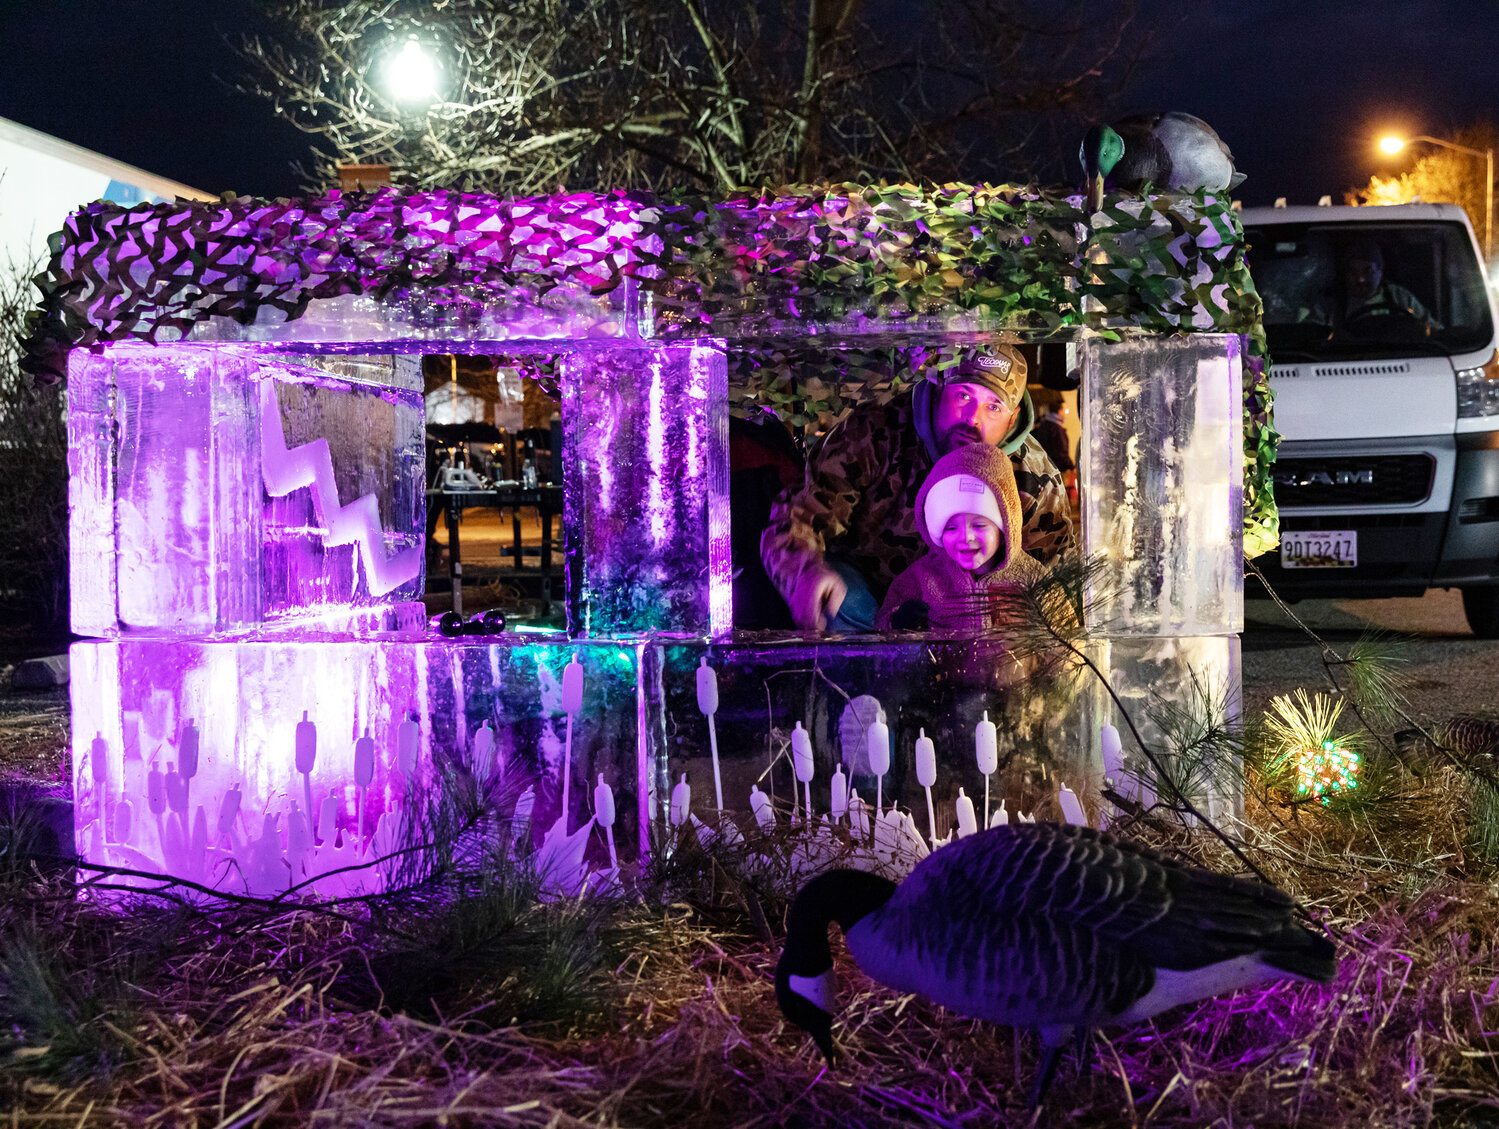 A holiday weekend of winter fun is coming to downtown Cambridge Jan. 12 and 13 when the Cambridge Ice & Oyster Festival returns for its third year with two action-packed days of activities celebrating Maryland’s Eastern Shore.